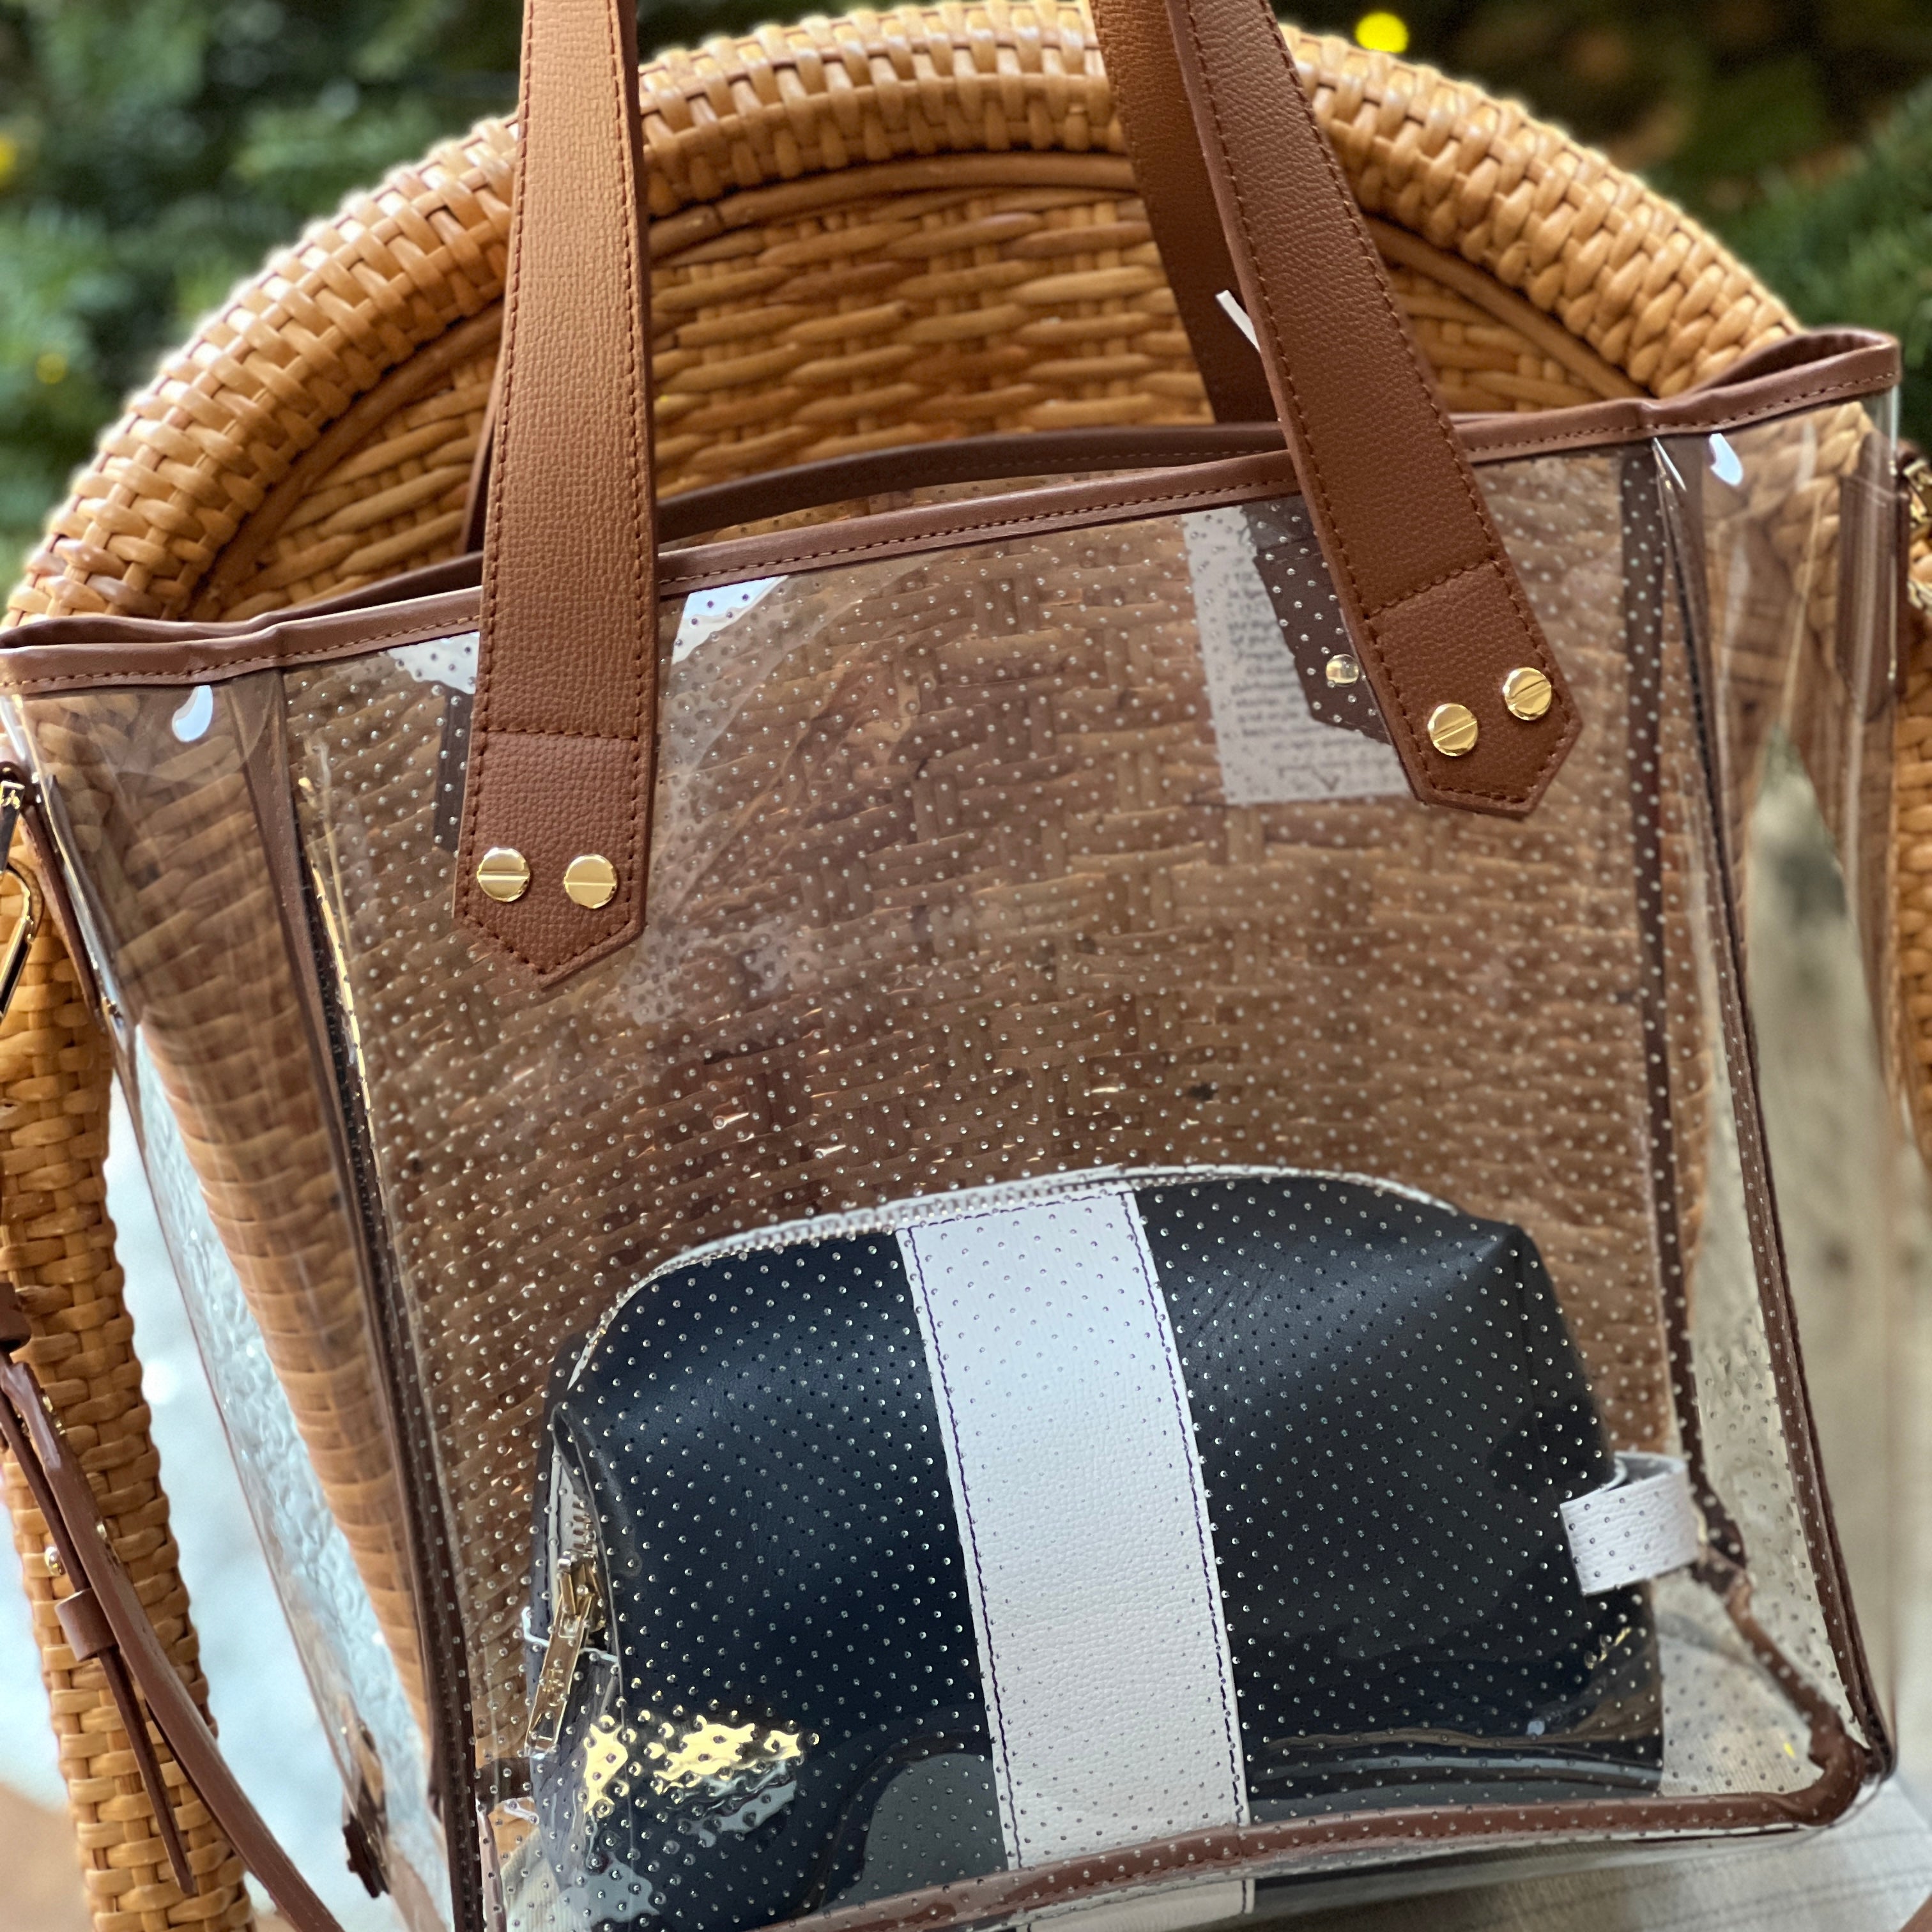 Gameday Bag - Tan Leather / Clear PVC